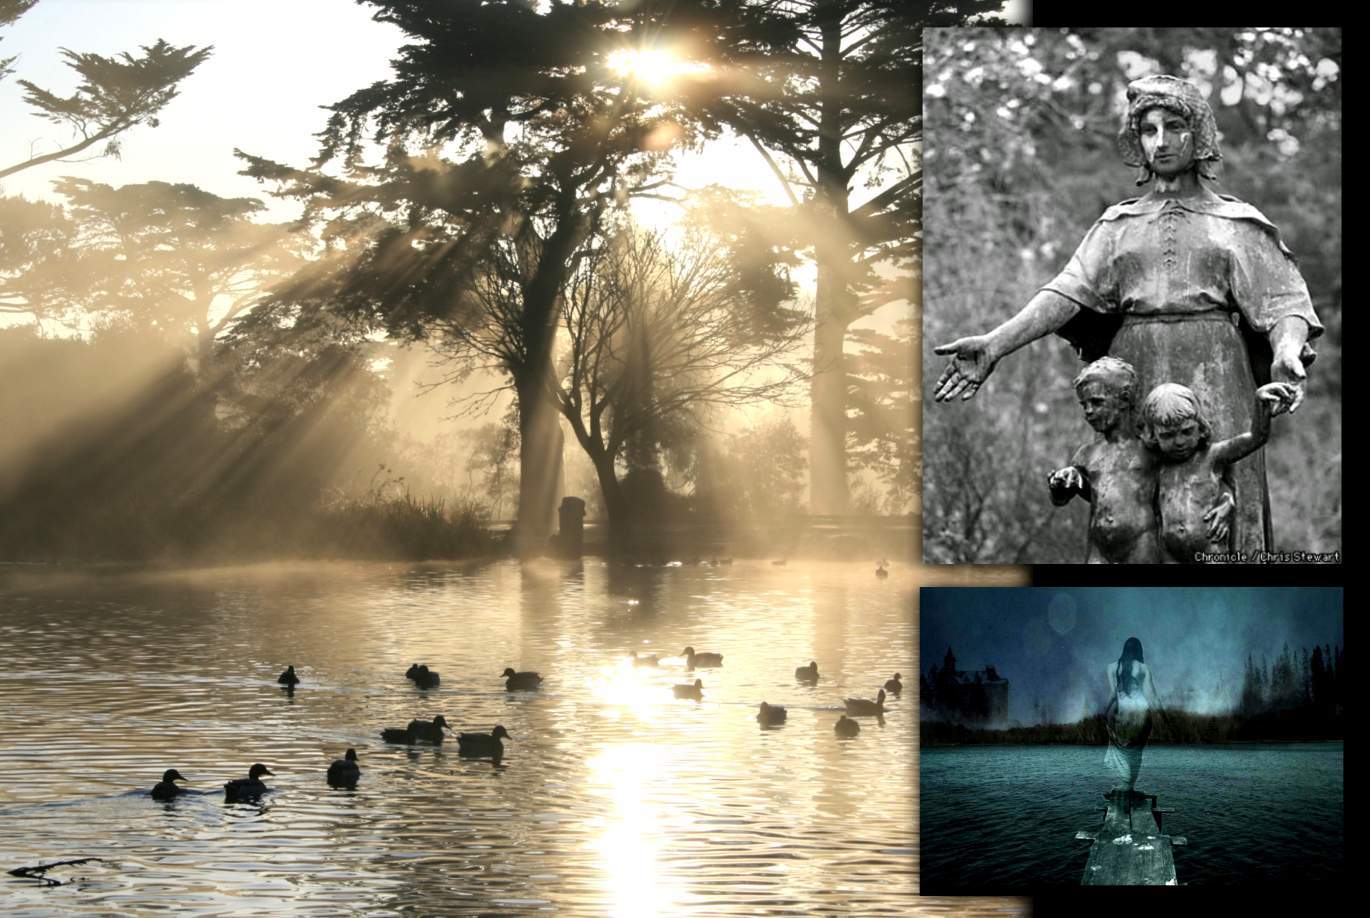 The ghost of Stow Lake in Golden Gate Park 3